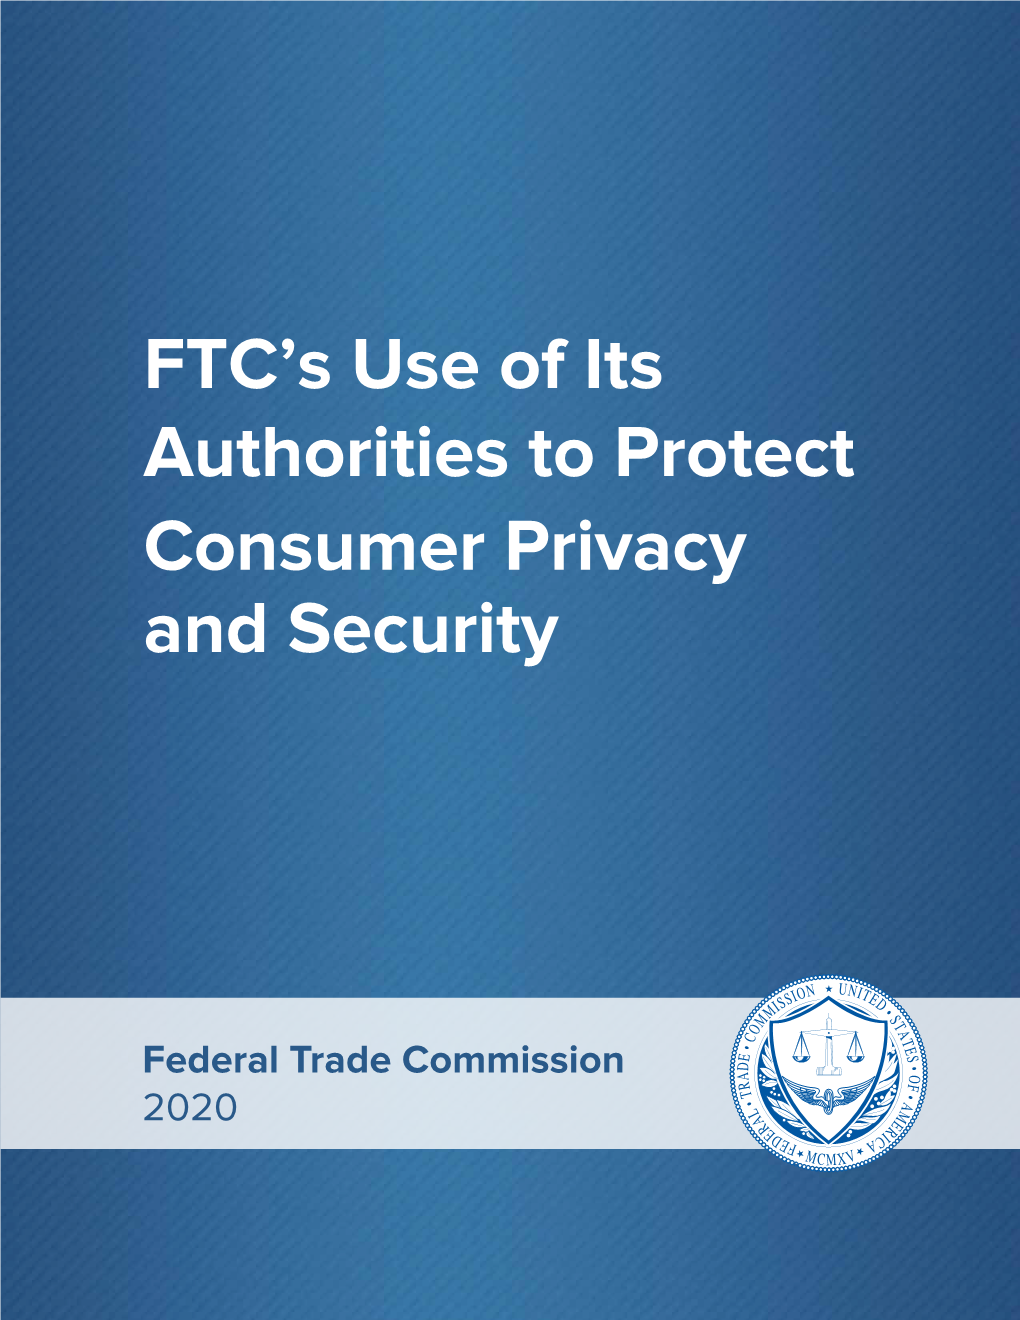 FTC's Use of Its Authorities to Protect Consumer Privacy and Security